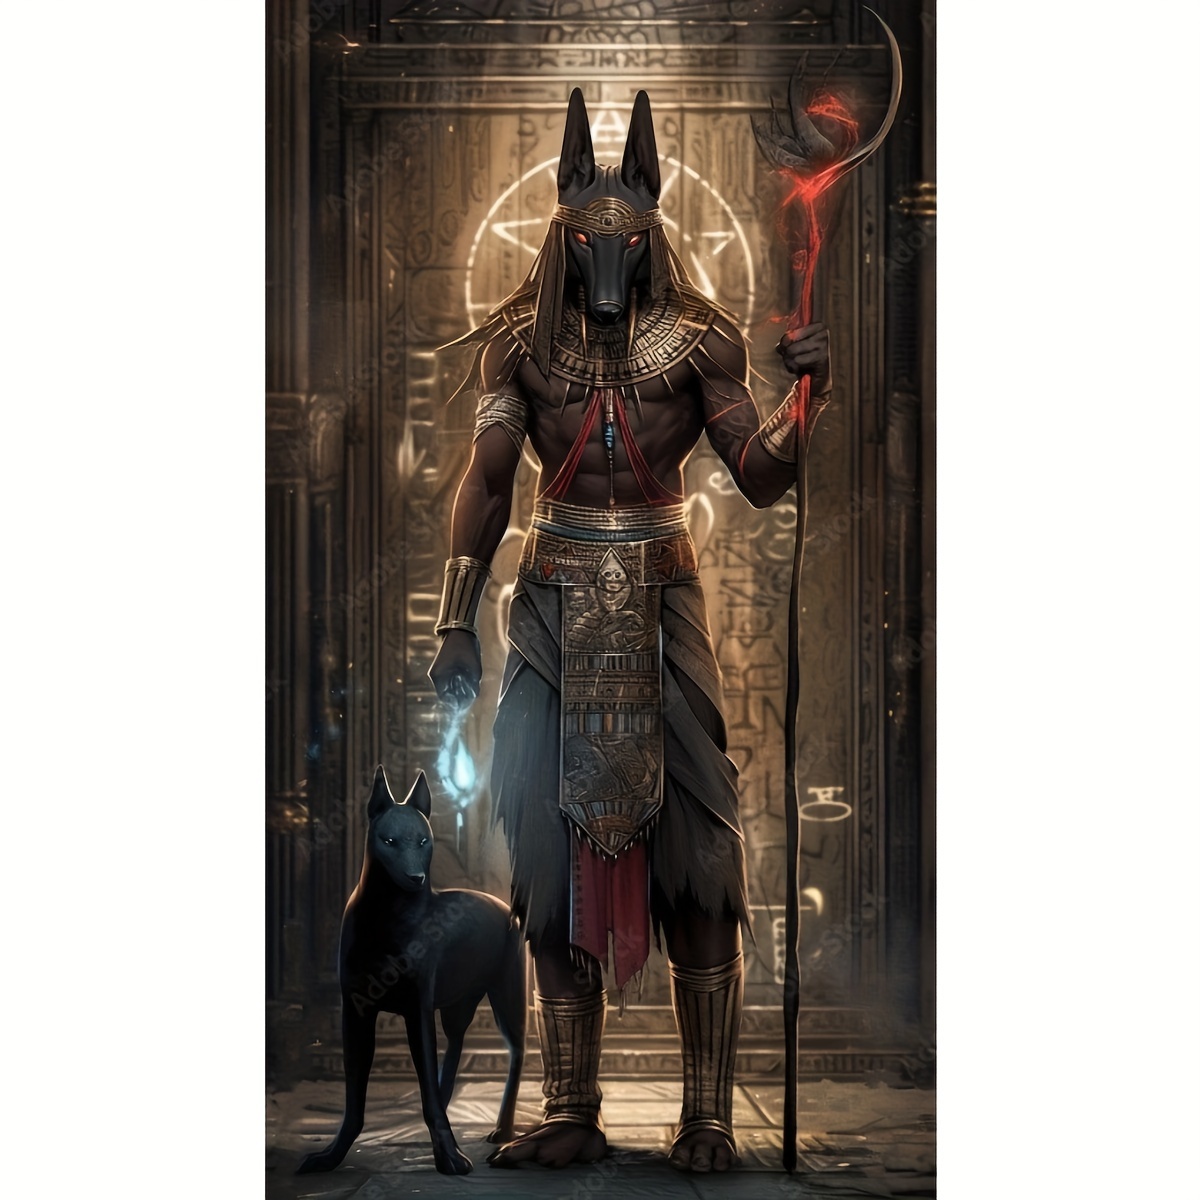 

Egyptian Anubis God And Black Cat Diamond Painting Kit - Round Acrylic Diamond Mosaic Art Set For Adults, Diy Full Drill Cross Stitch Craft, Frameless Embroidery Home Wall Decor Gift